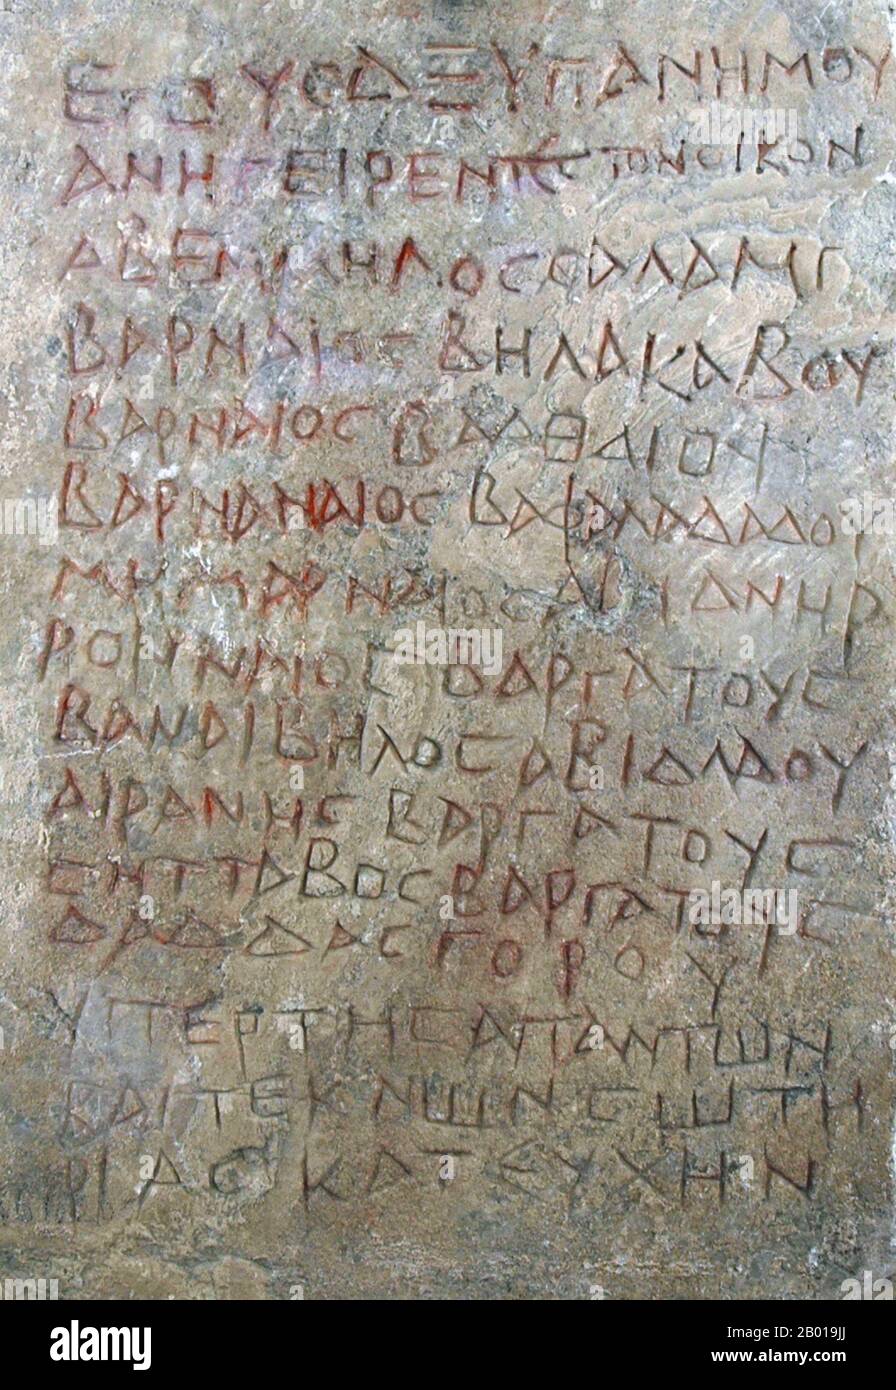 Syria: Greek votive inscription from the Temple of Adonis in Dura Europos, 153 CE.  Greek votive inscription from the Temple of Adonis in Dura Europos, commemorating the construction in 153 CE of a banquet hall by an association of believers. Marble, 153 CE, found in Salhiyé, Syria. Stock Photo